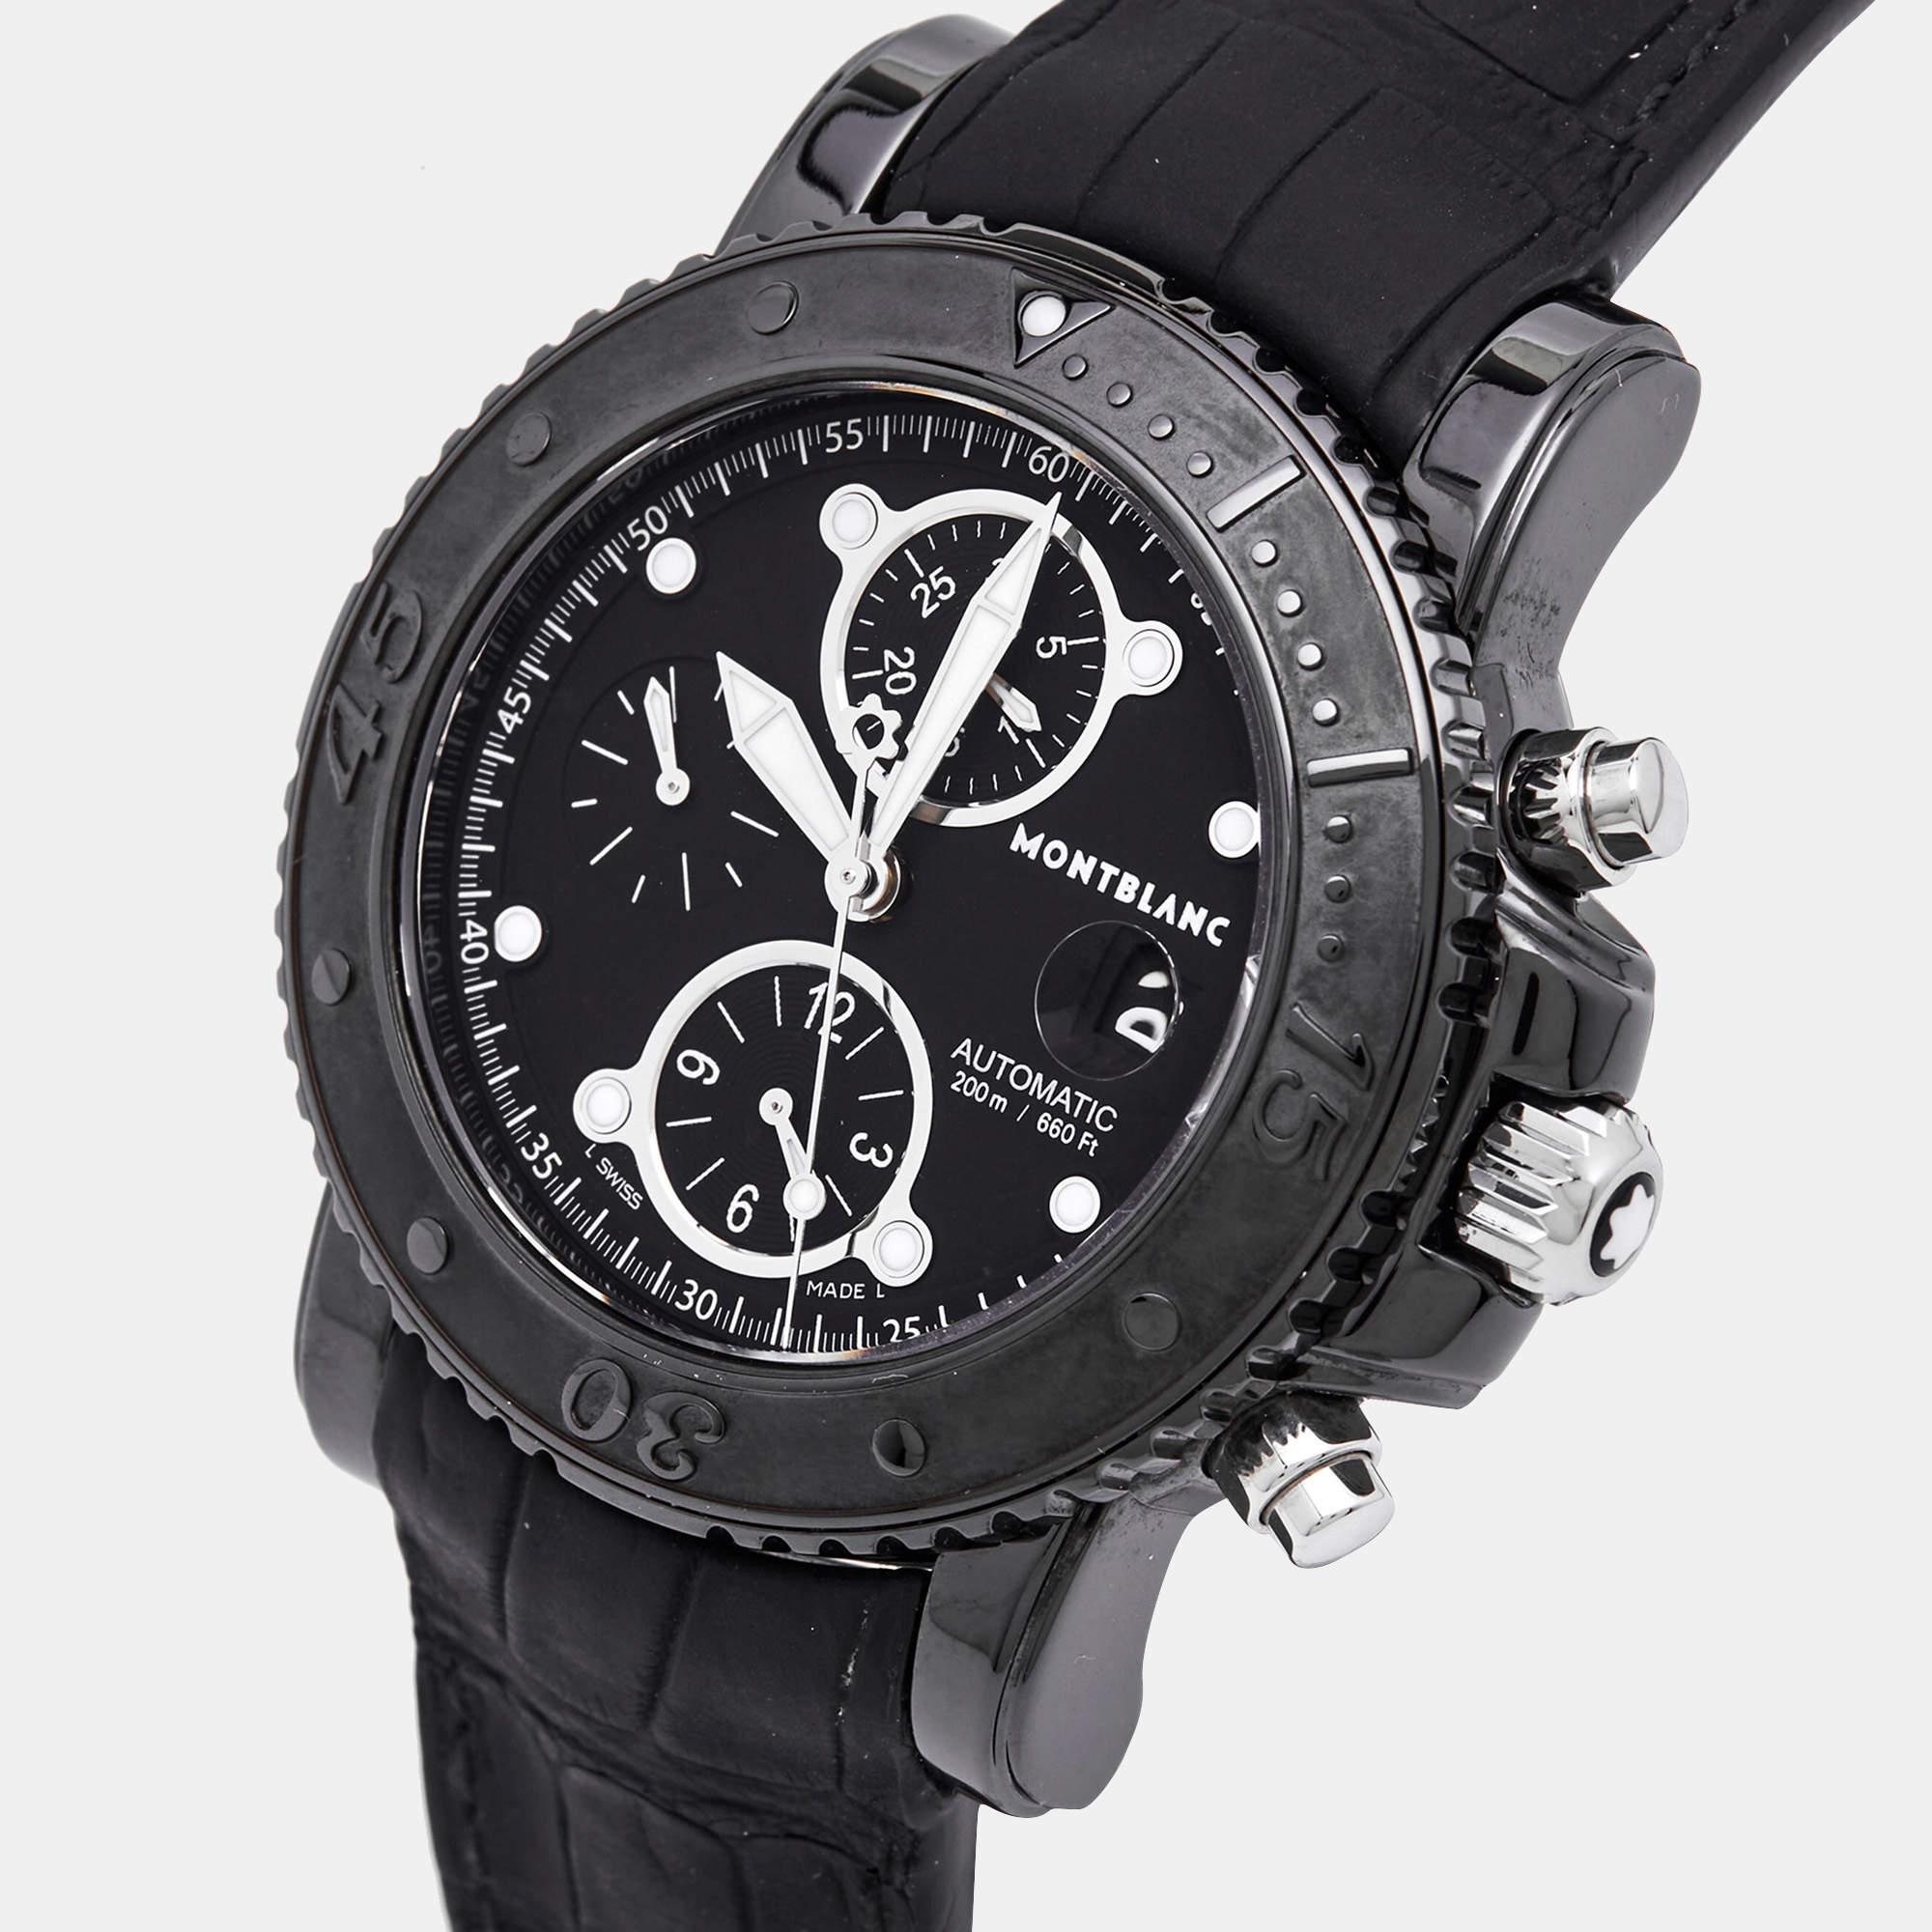 Sophisticated and appealing, this Montblanc watch is the perfect addition for a classy, on edge look. Its black PVD coated bezel is made from stainless steel and it outlines a black dial designed with seconds indexes, luminous hands and hour